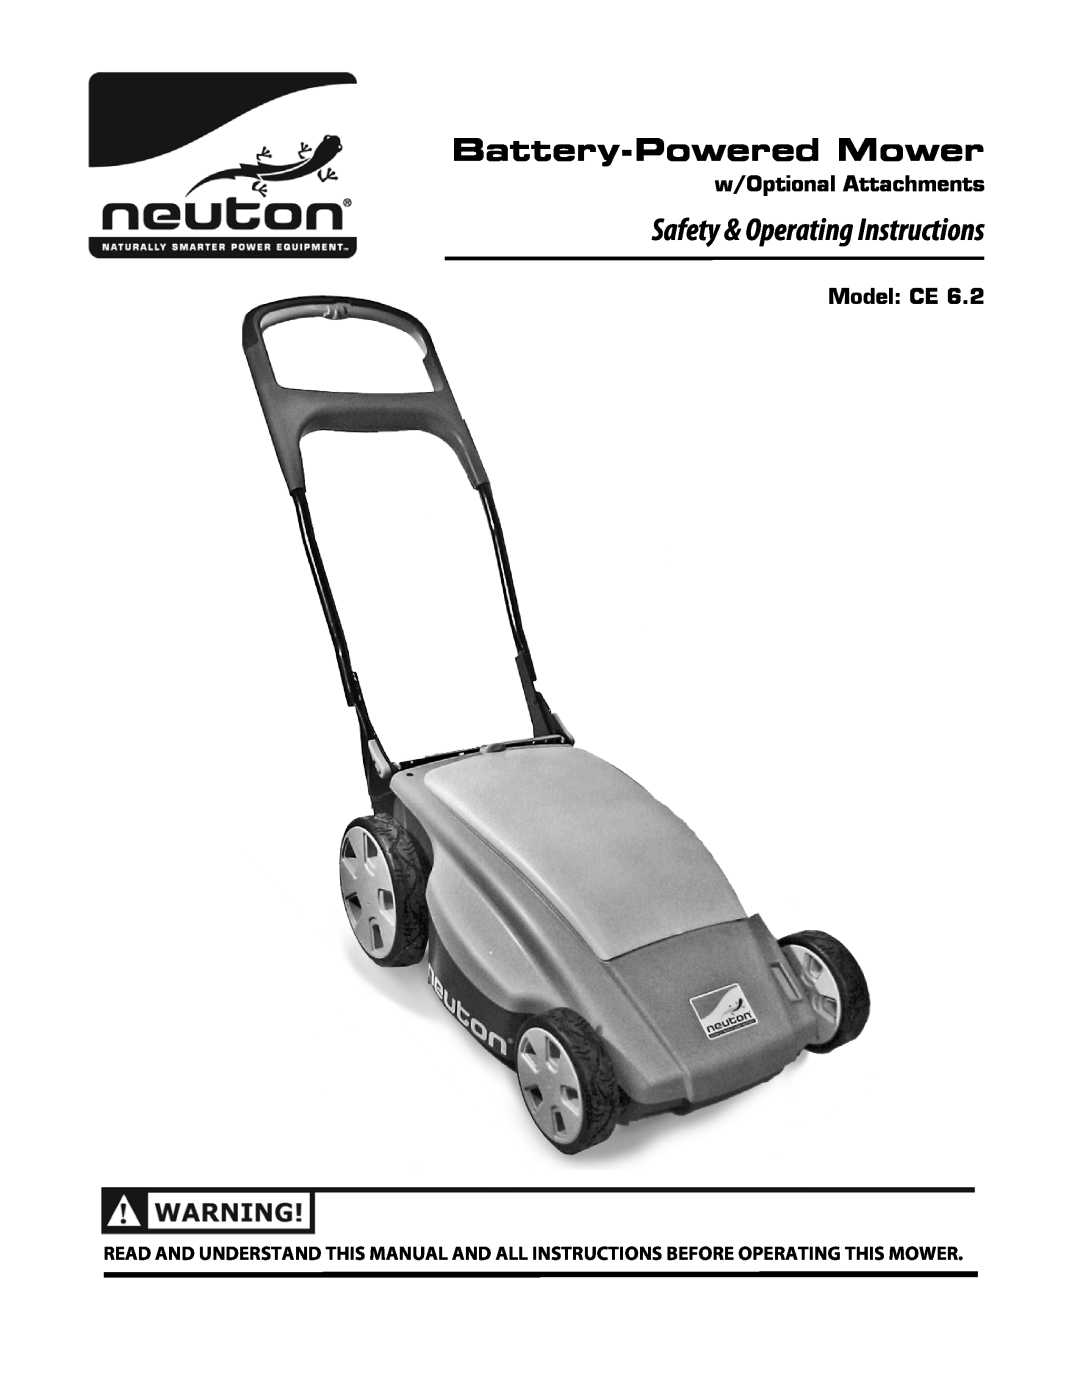 Neuton CE 6.2 manual Battery-PoweredMower, Safety & Operating Instructions, w/Optional Attachments, Model CE 